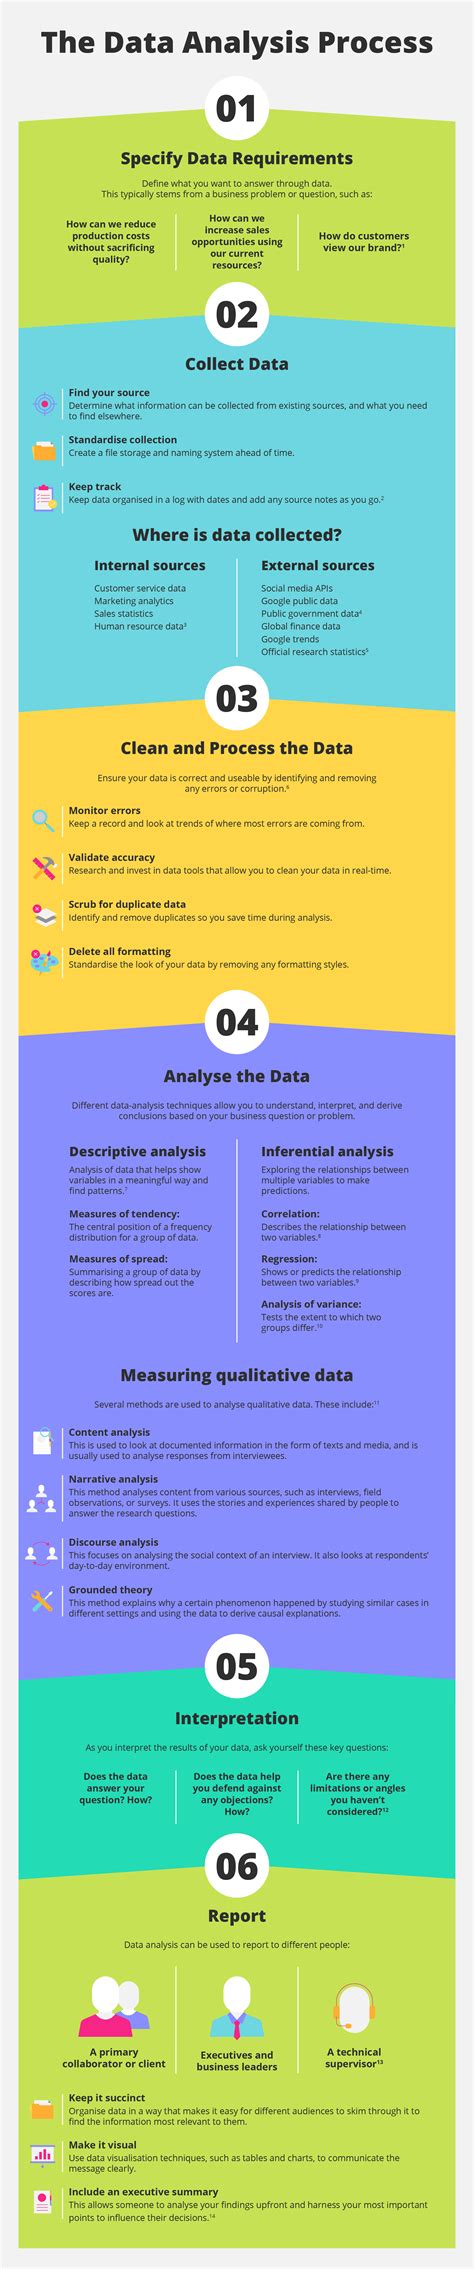 What Is The Data Analysis Process 5 Key Steps To Follow Riset